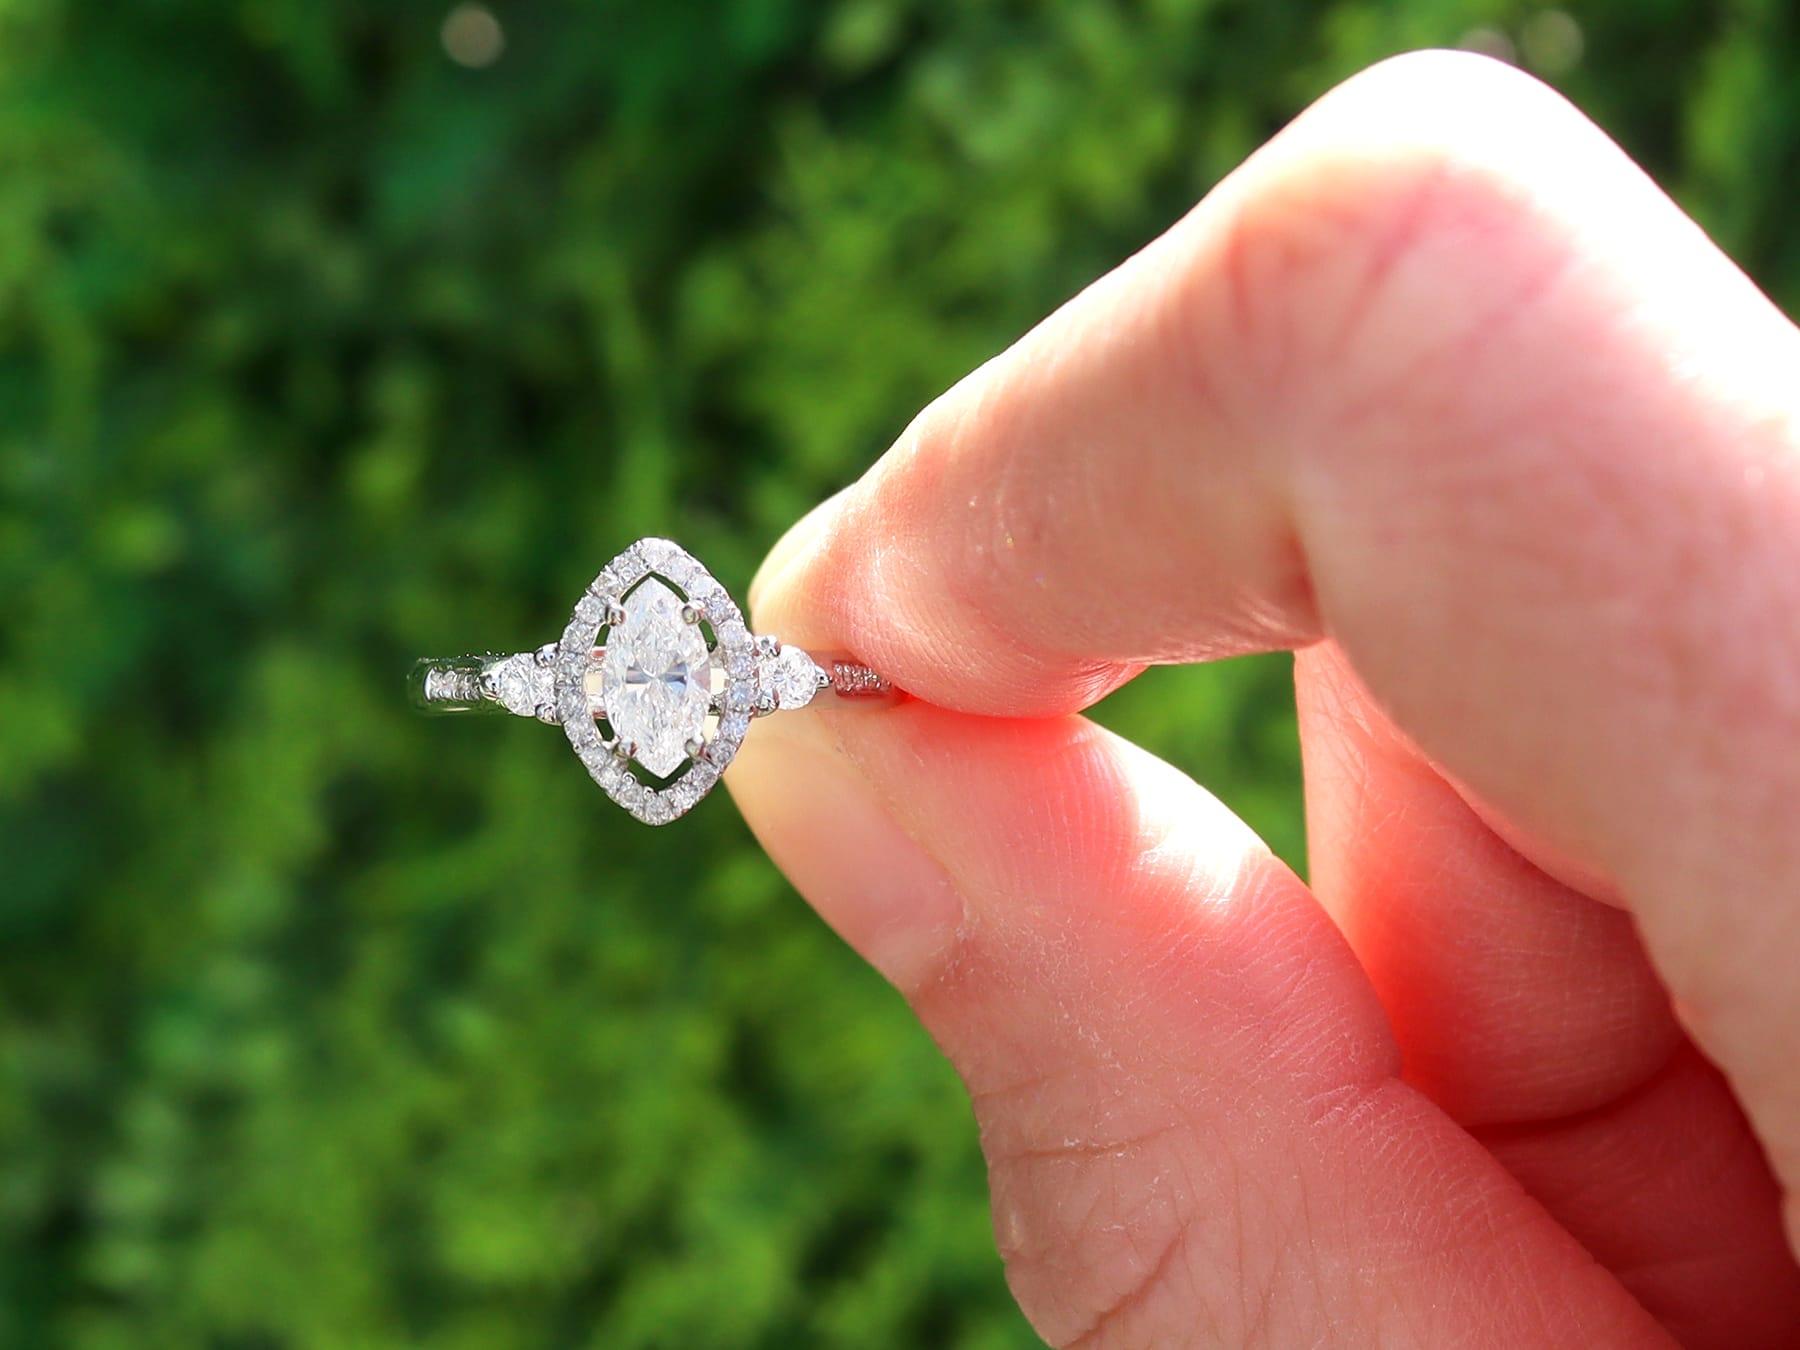 A stunning, fine and impressive vintage 0.83 carat diamond and 18 karat white gold halo engagement ring; part of our marquise shaped diamond jewelry collections.

This stunning, fine and impressive vintage diamond ring has been crafted in 18k white